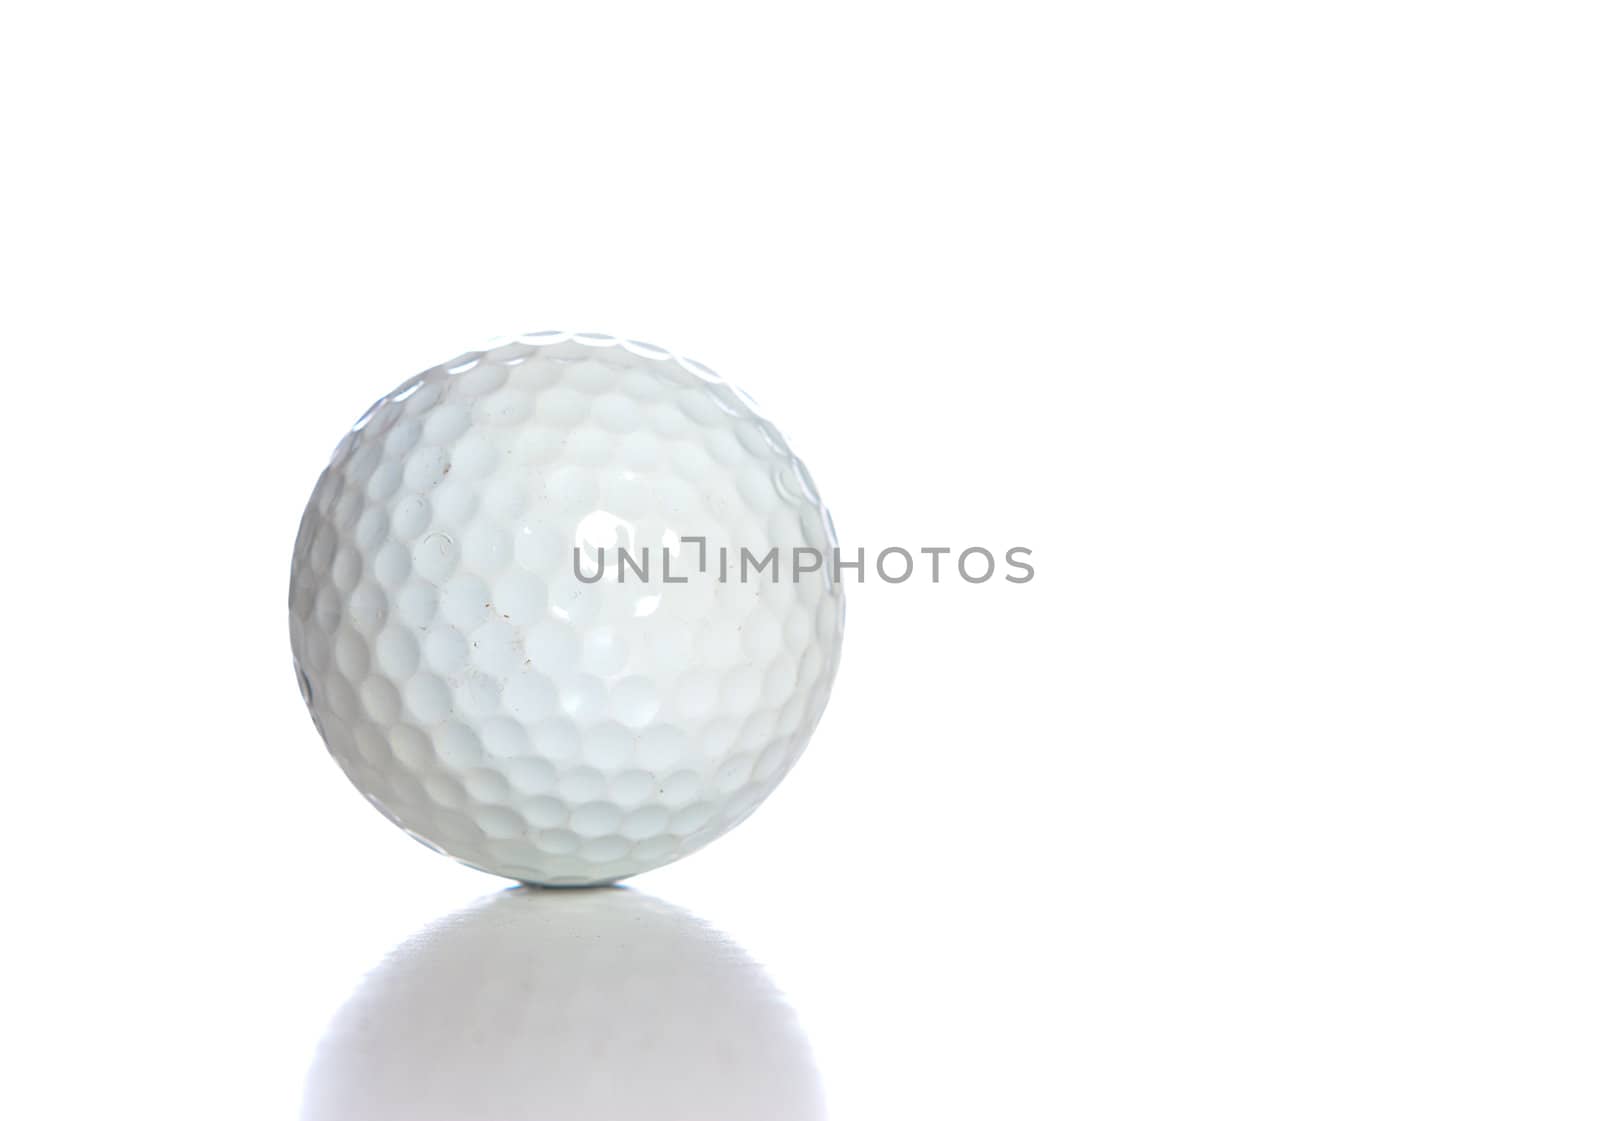 A white golf ball with a reflection, shot against a white background.